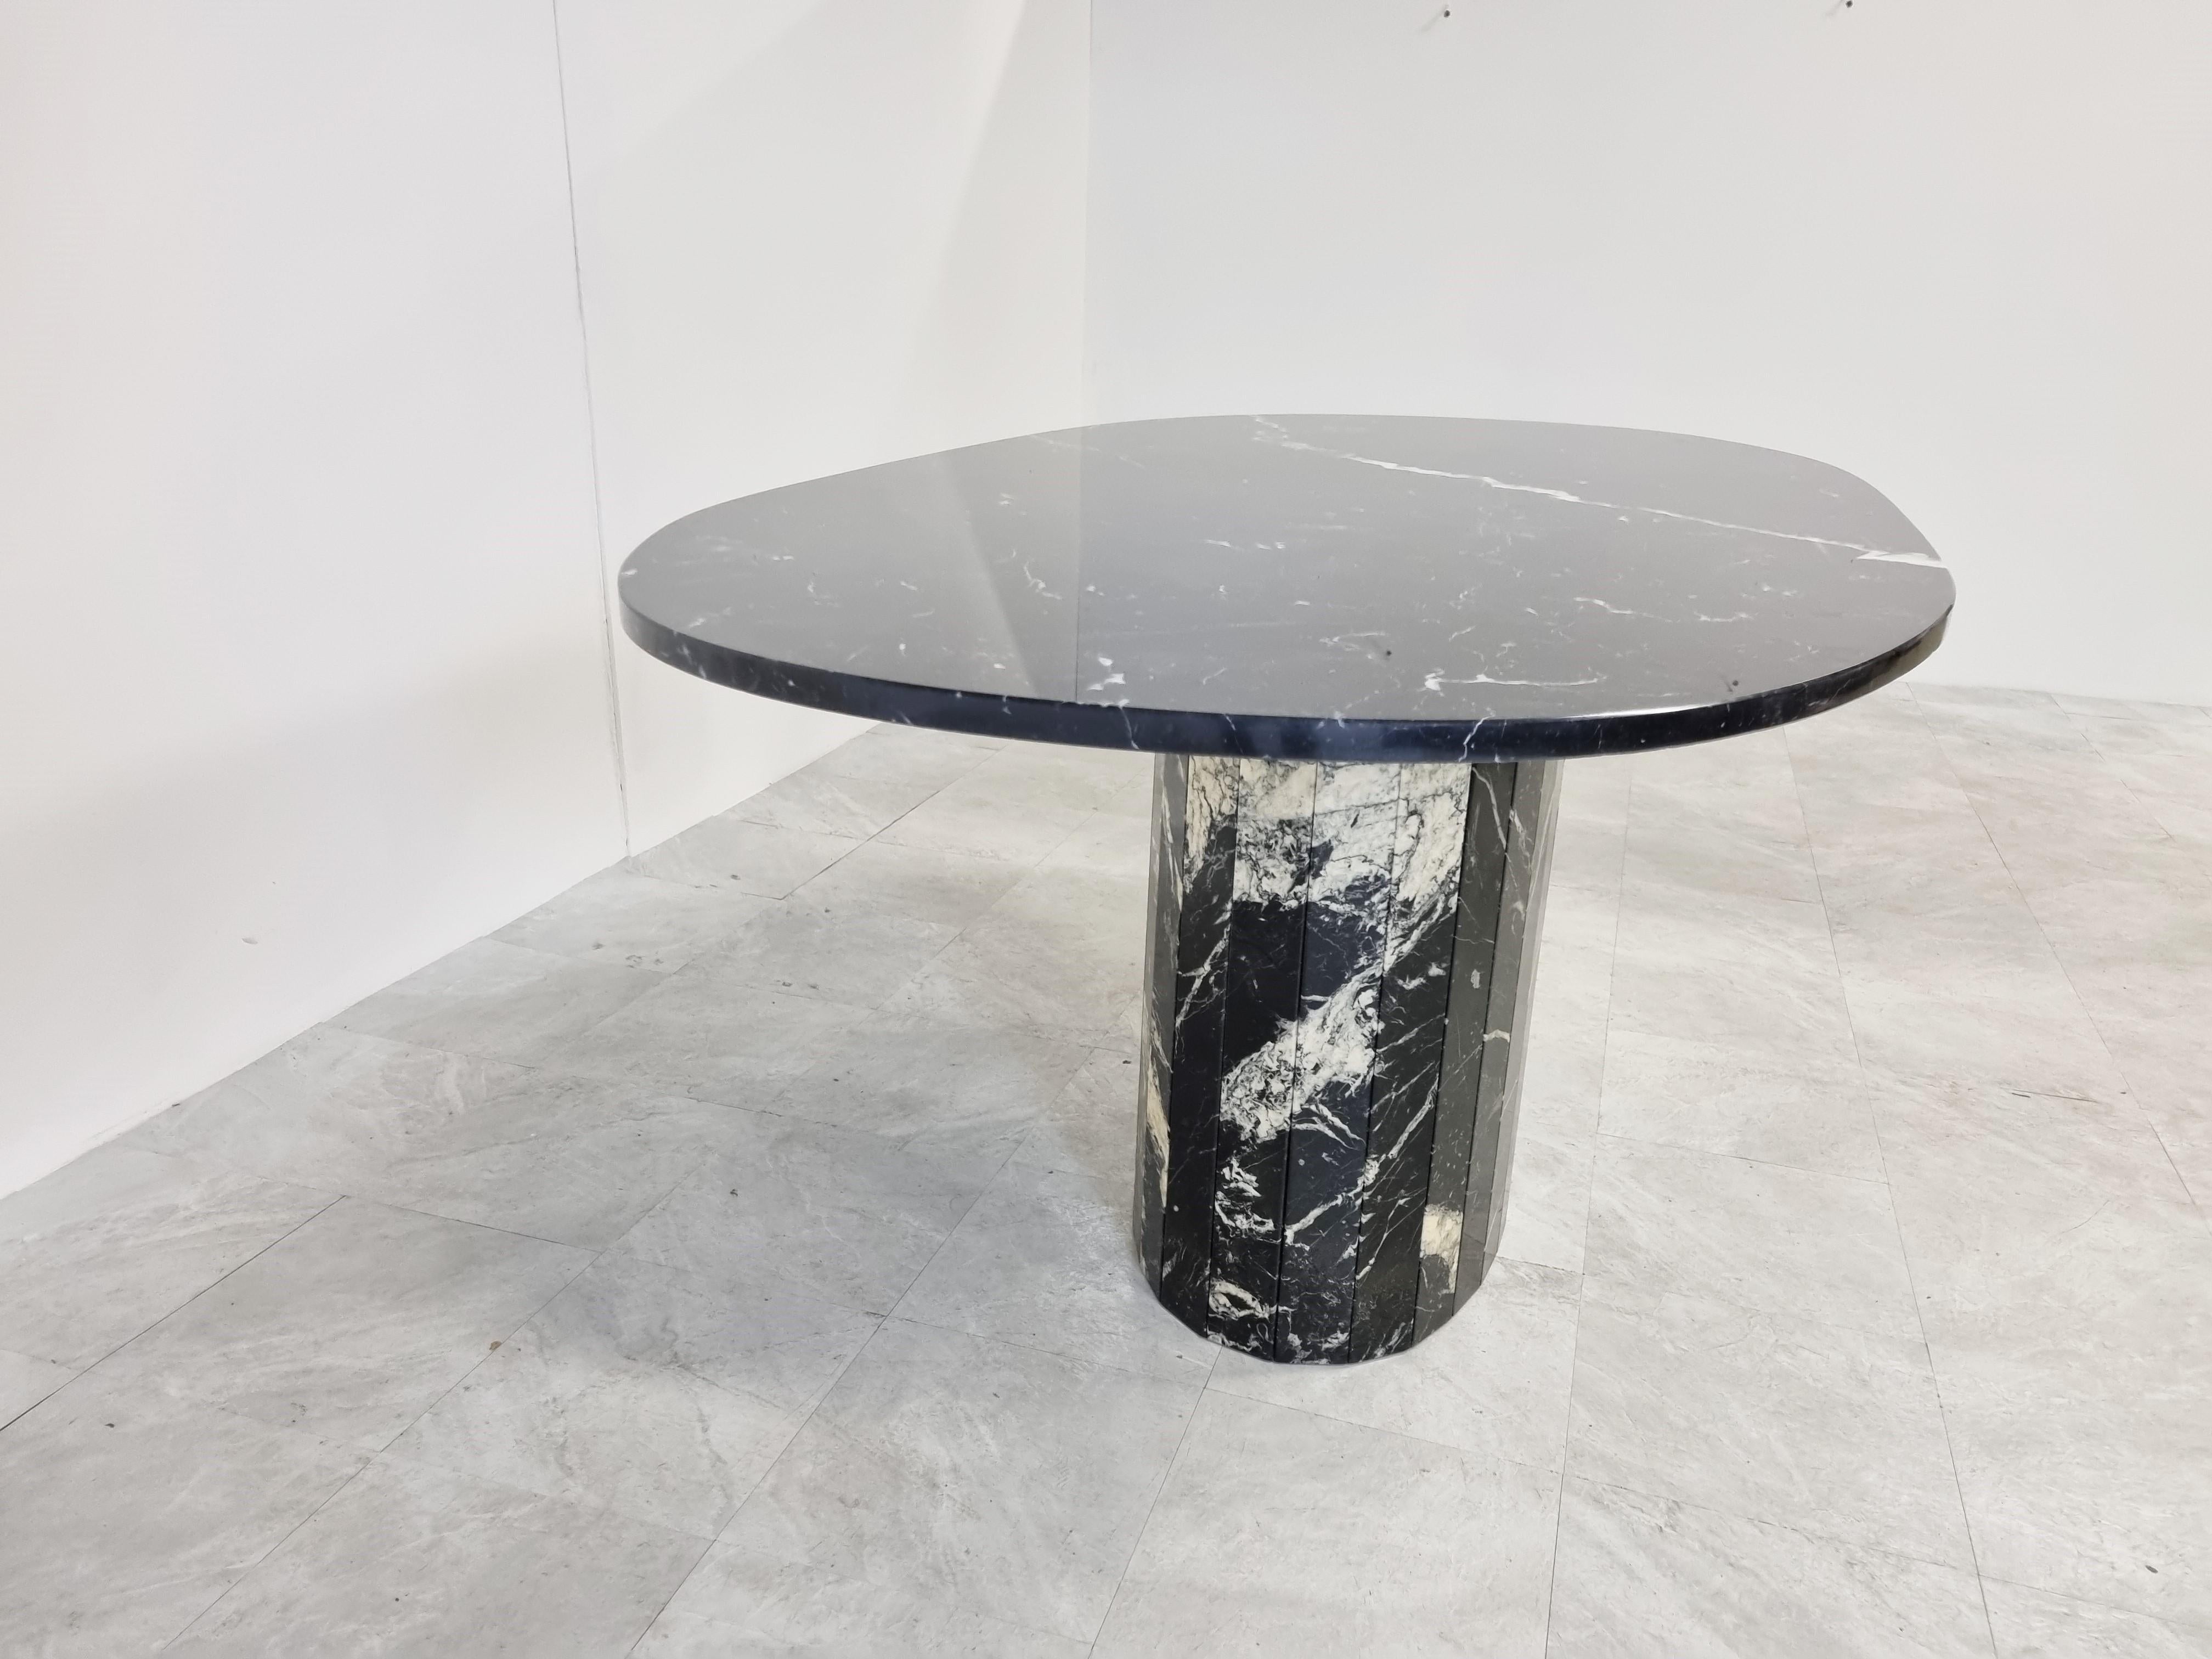 Elegant black marble dining table with a reeded central base. 

Beautiful veined marble.

Timeless and very beautiful table wich fits most interiors.

Good condition. 

1970s - Italy

Dimensions:
Height: 74cm/29.13